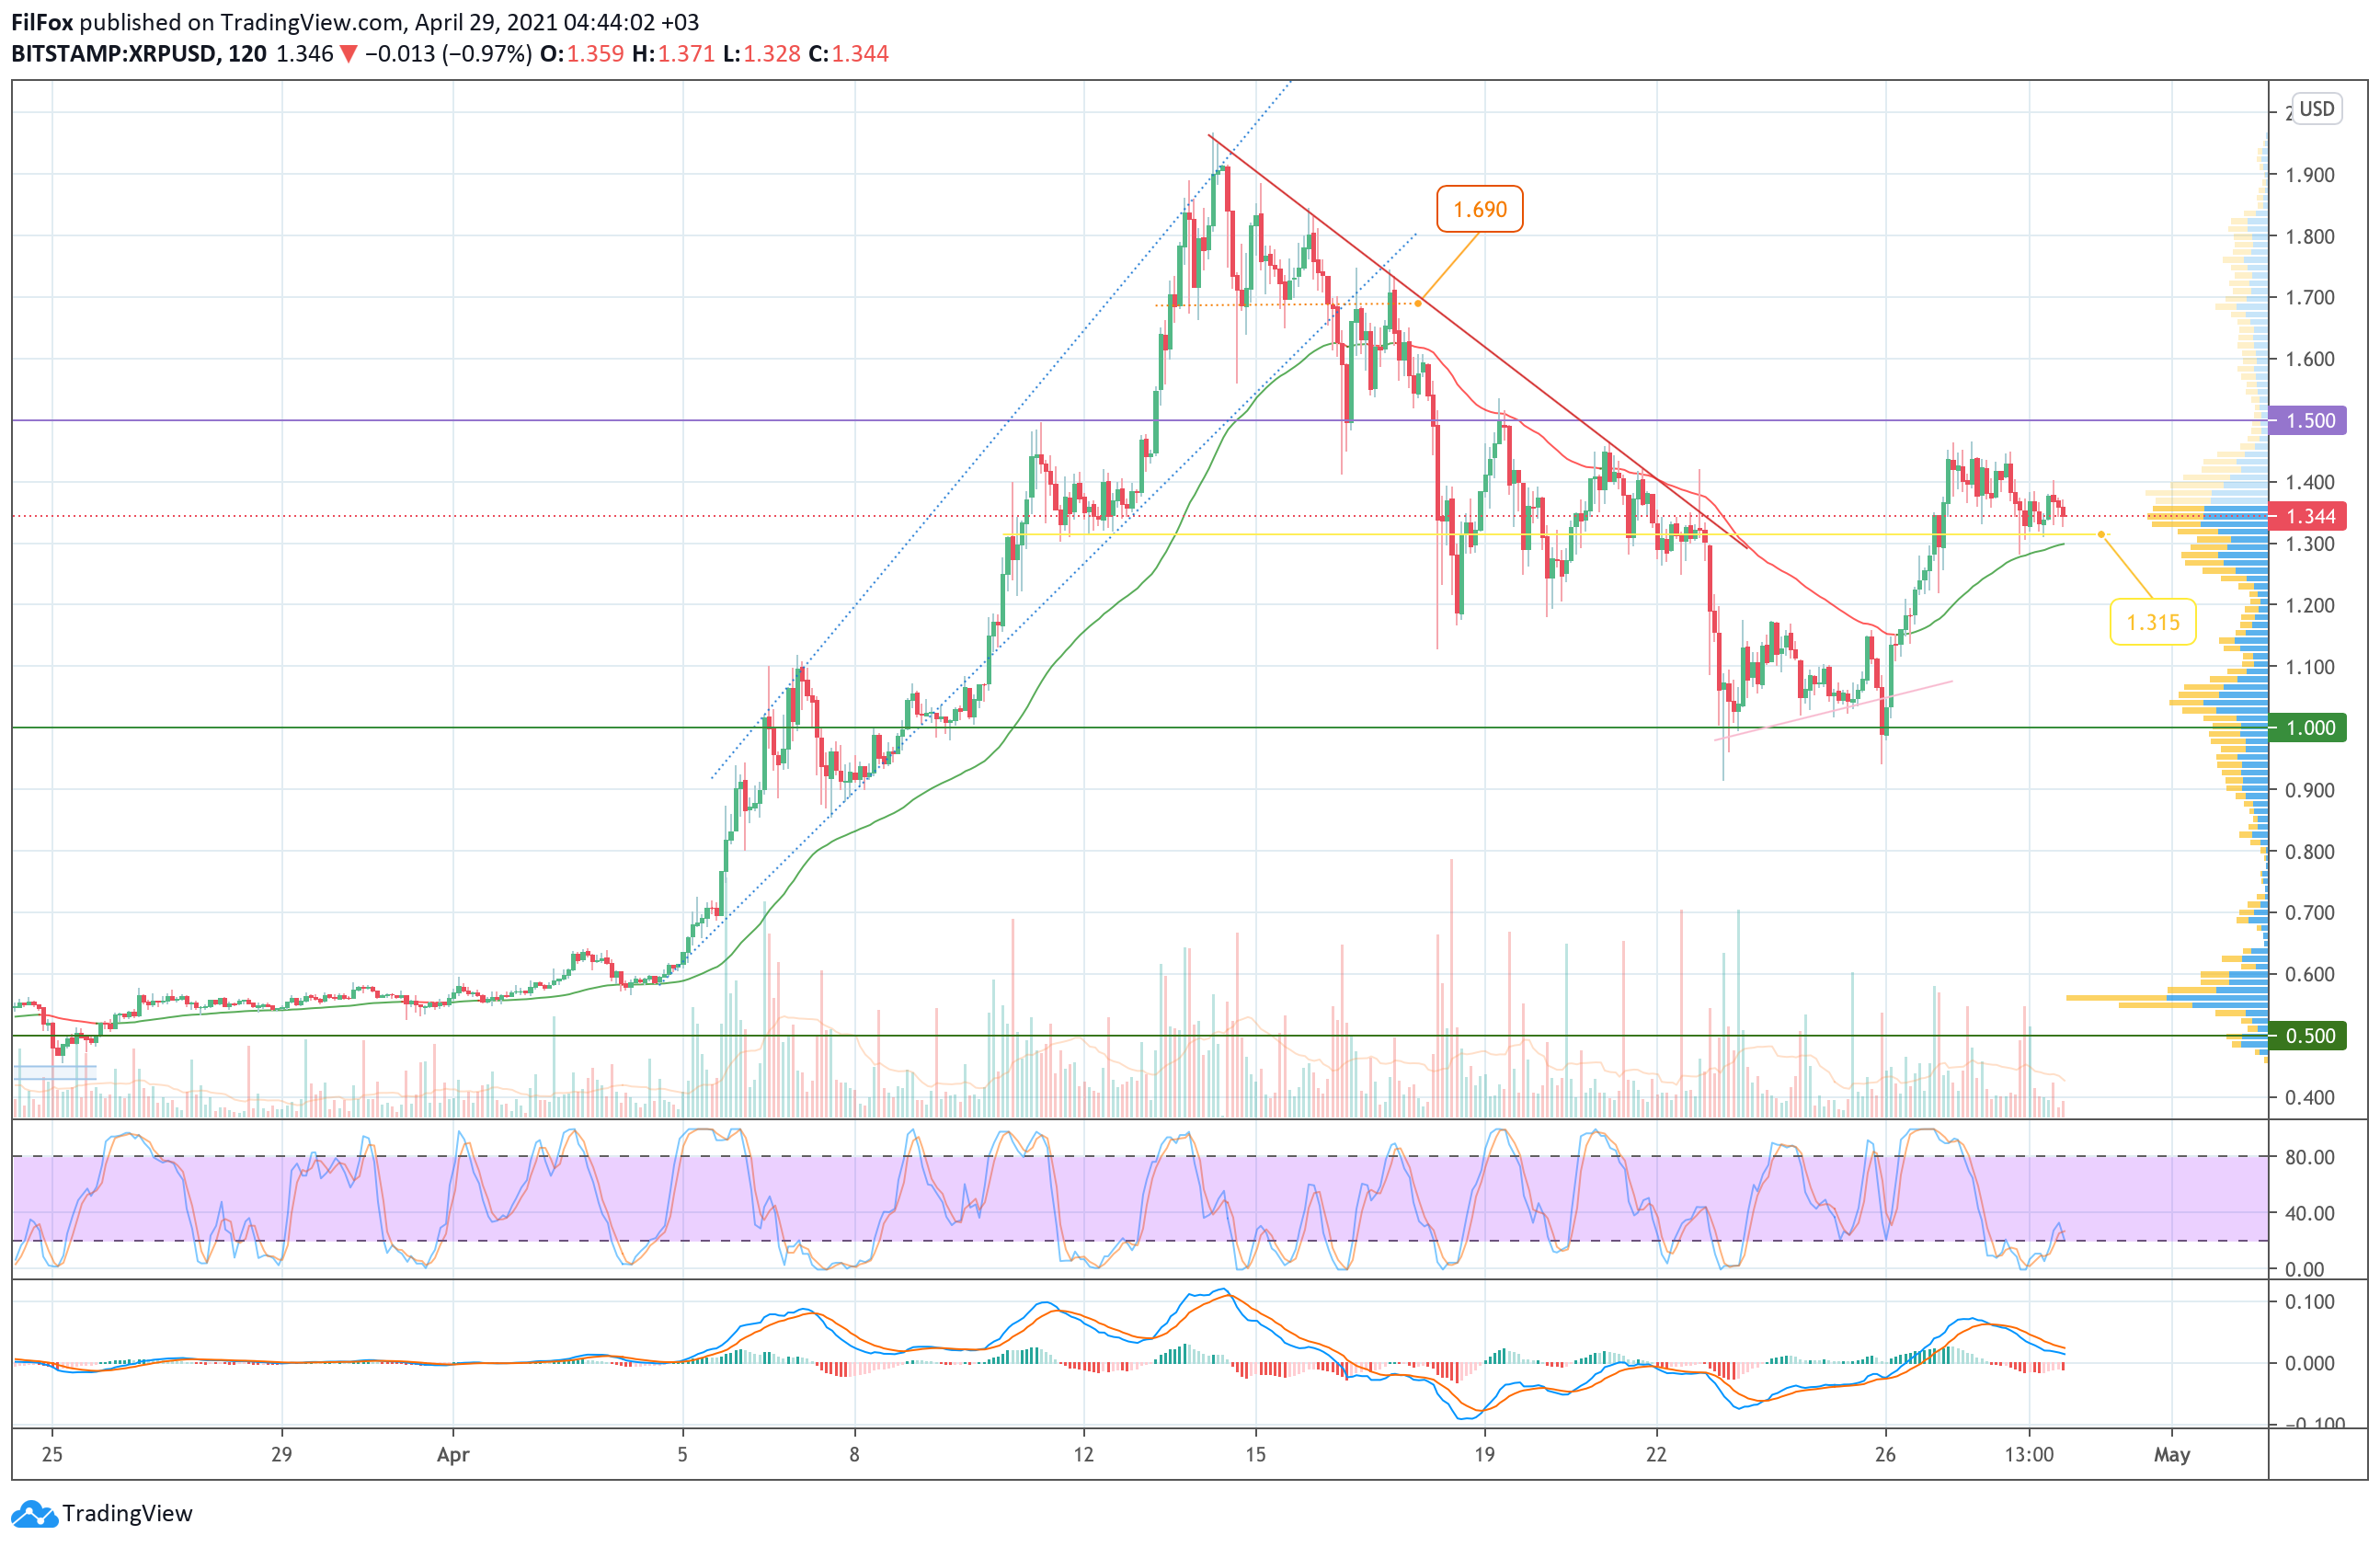 Analysis of the prices of Bitcoin, Ethereum, XRP for 04/29/2021